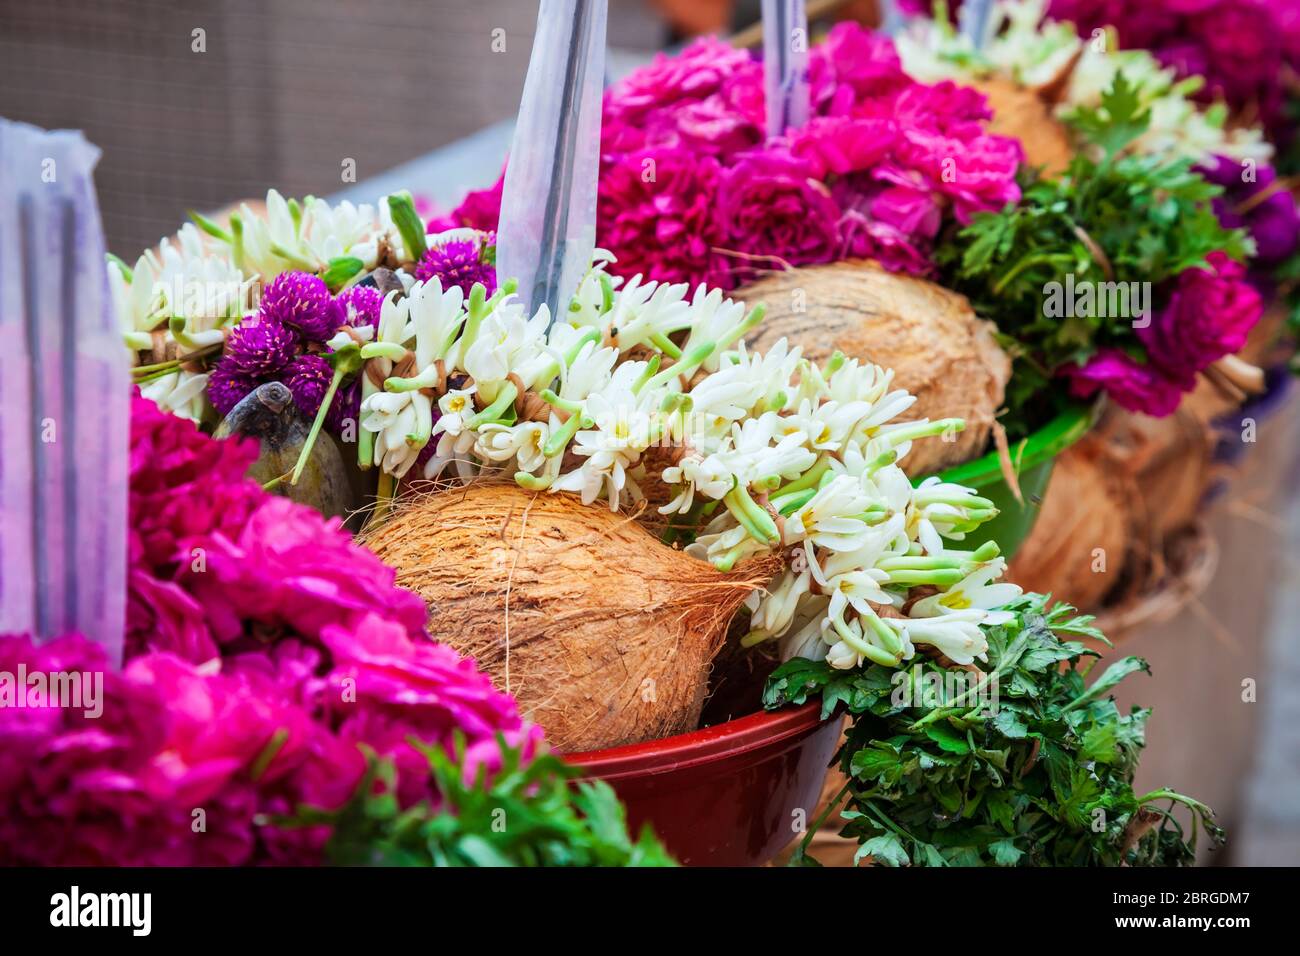 Coconut and flower offerings for holi puja in India Stock Photo